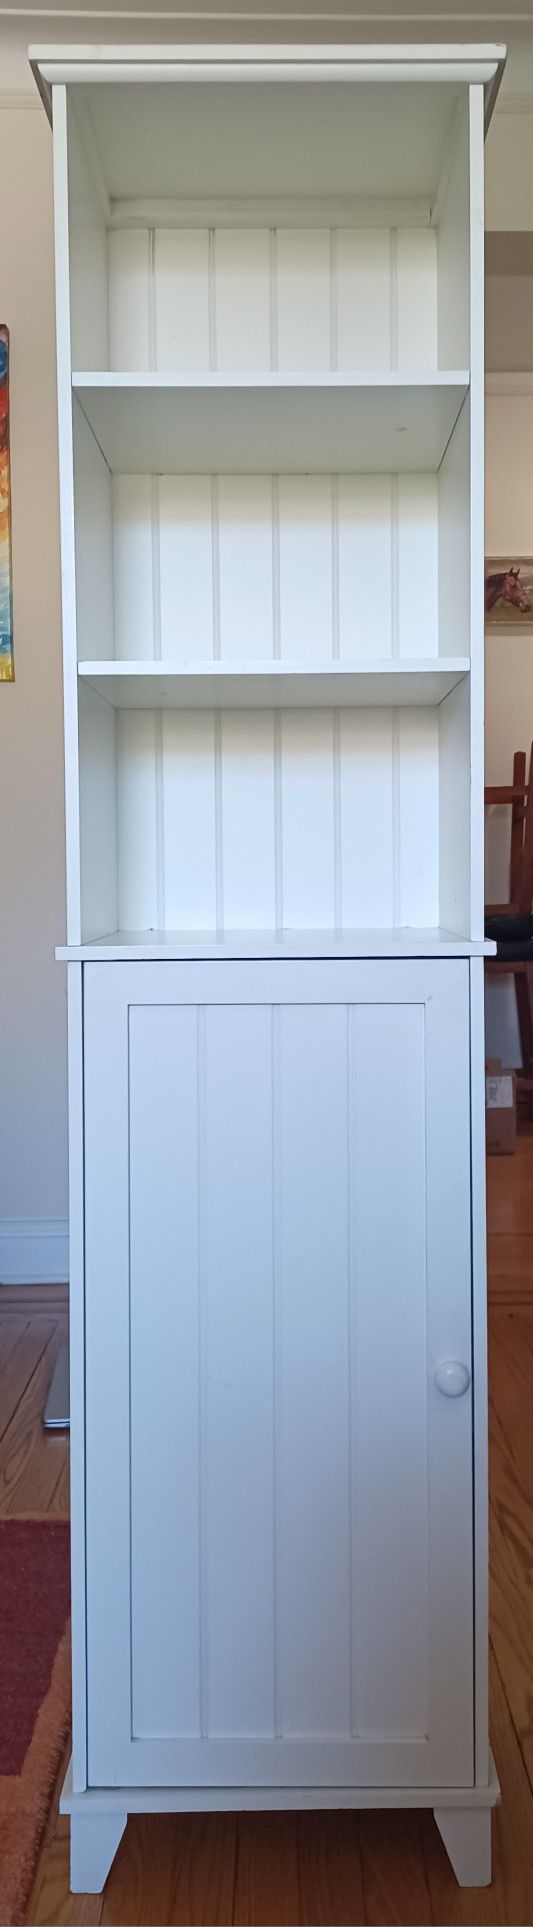 Tall Display/storage Cabinet With Shelves